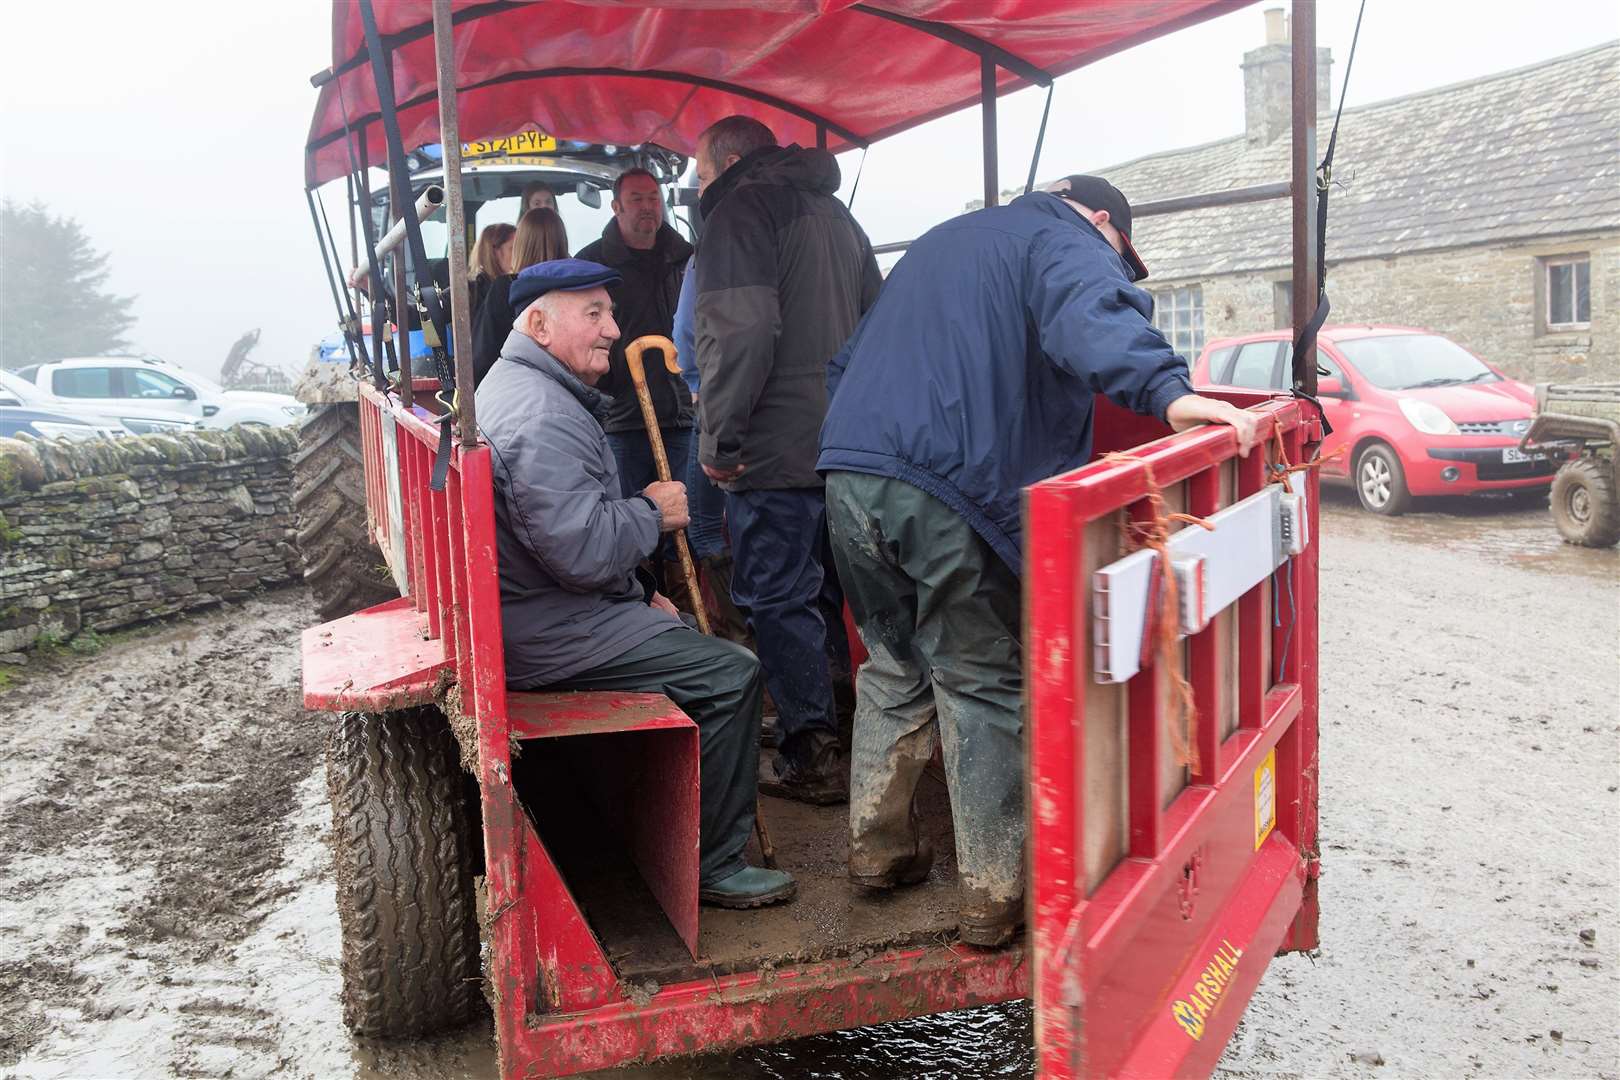 Another group of spectators board the trailer for a tour of the competition fields. Photo: Robert MacDonald/Northern Studios